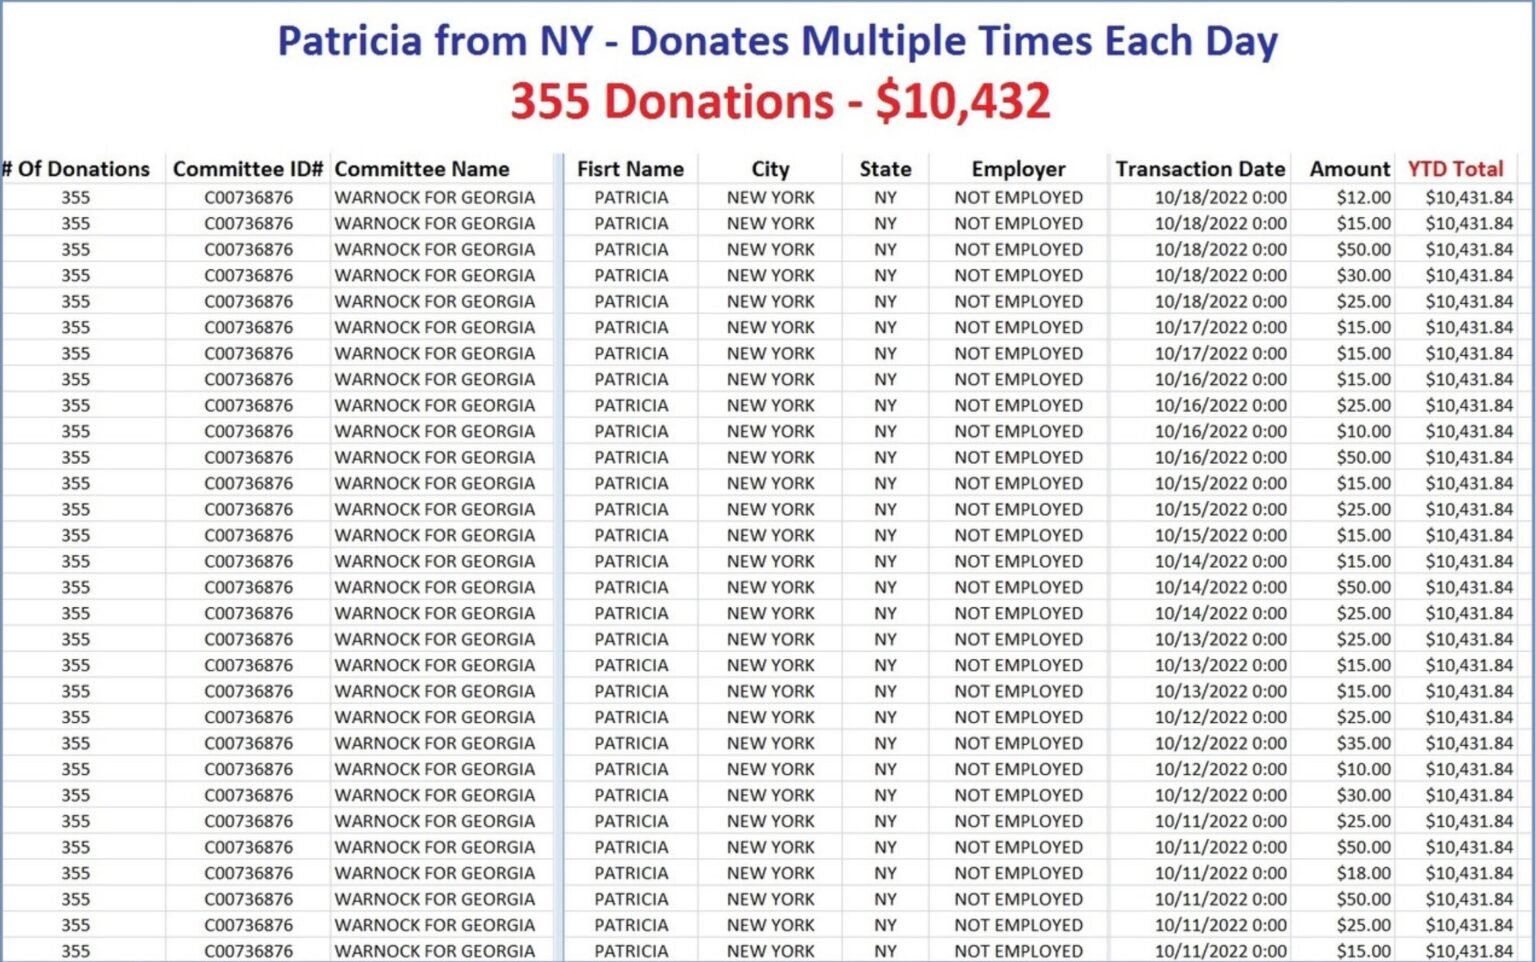 Voter-Mule-by-total-donation-1-1536x962.jpg